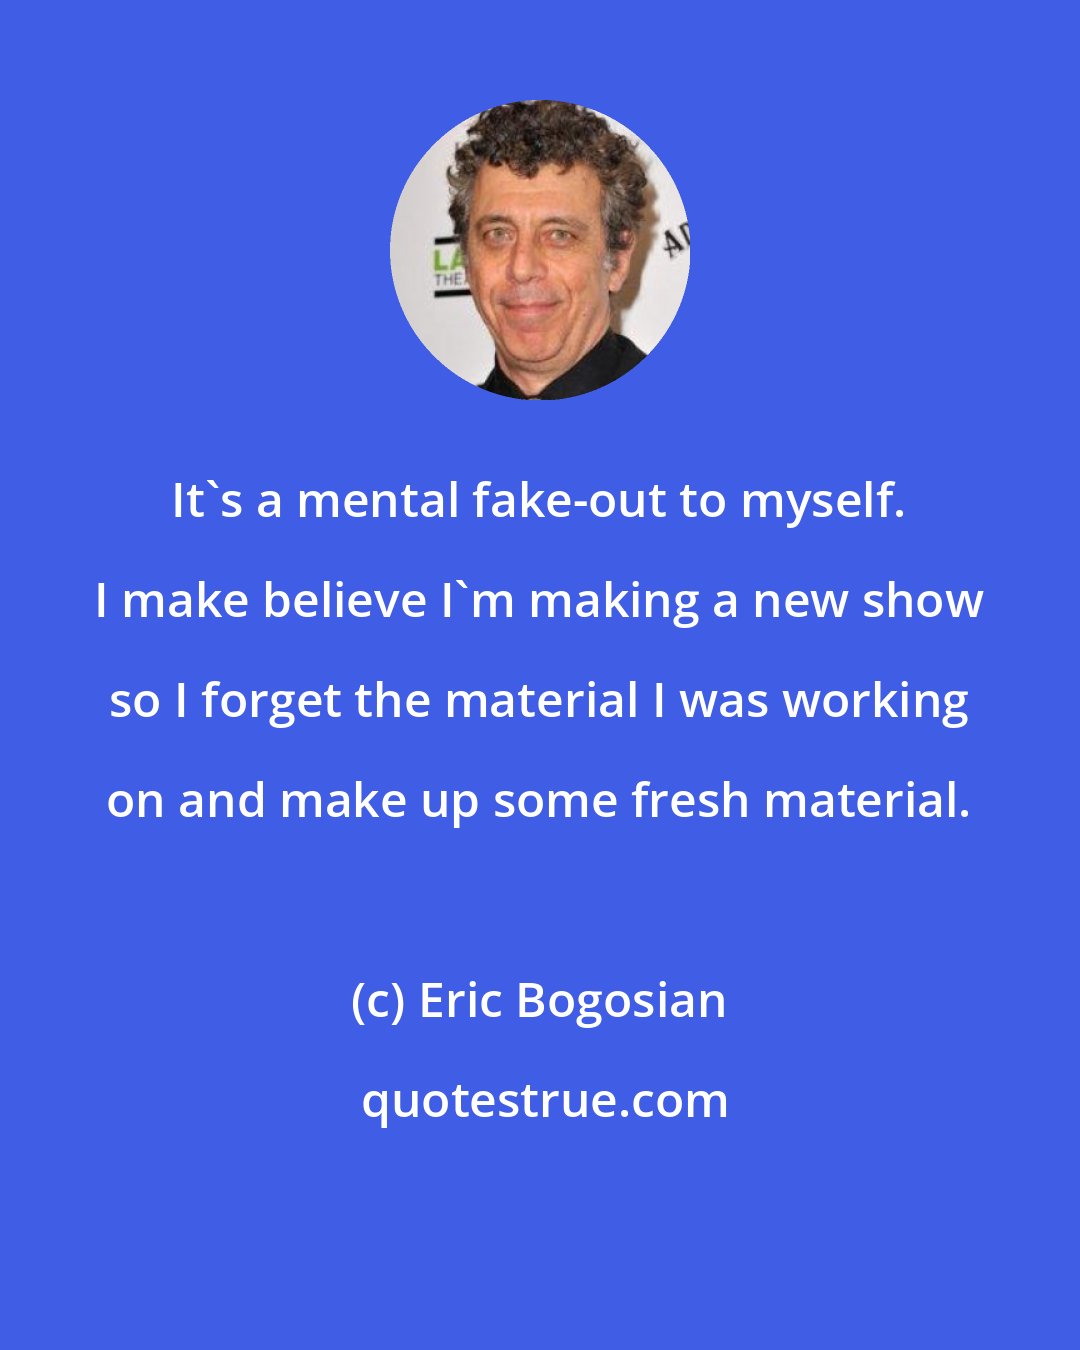 Eric Bogosian: It's a mental fake-out to myself. I make believe I'm making a new show so I forget the material I was working on and make up some fresh material.